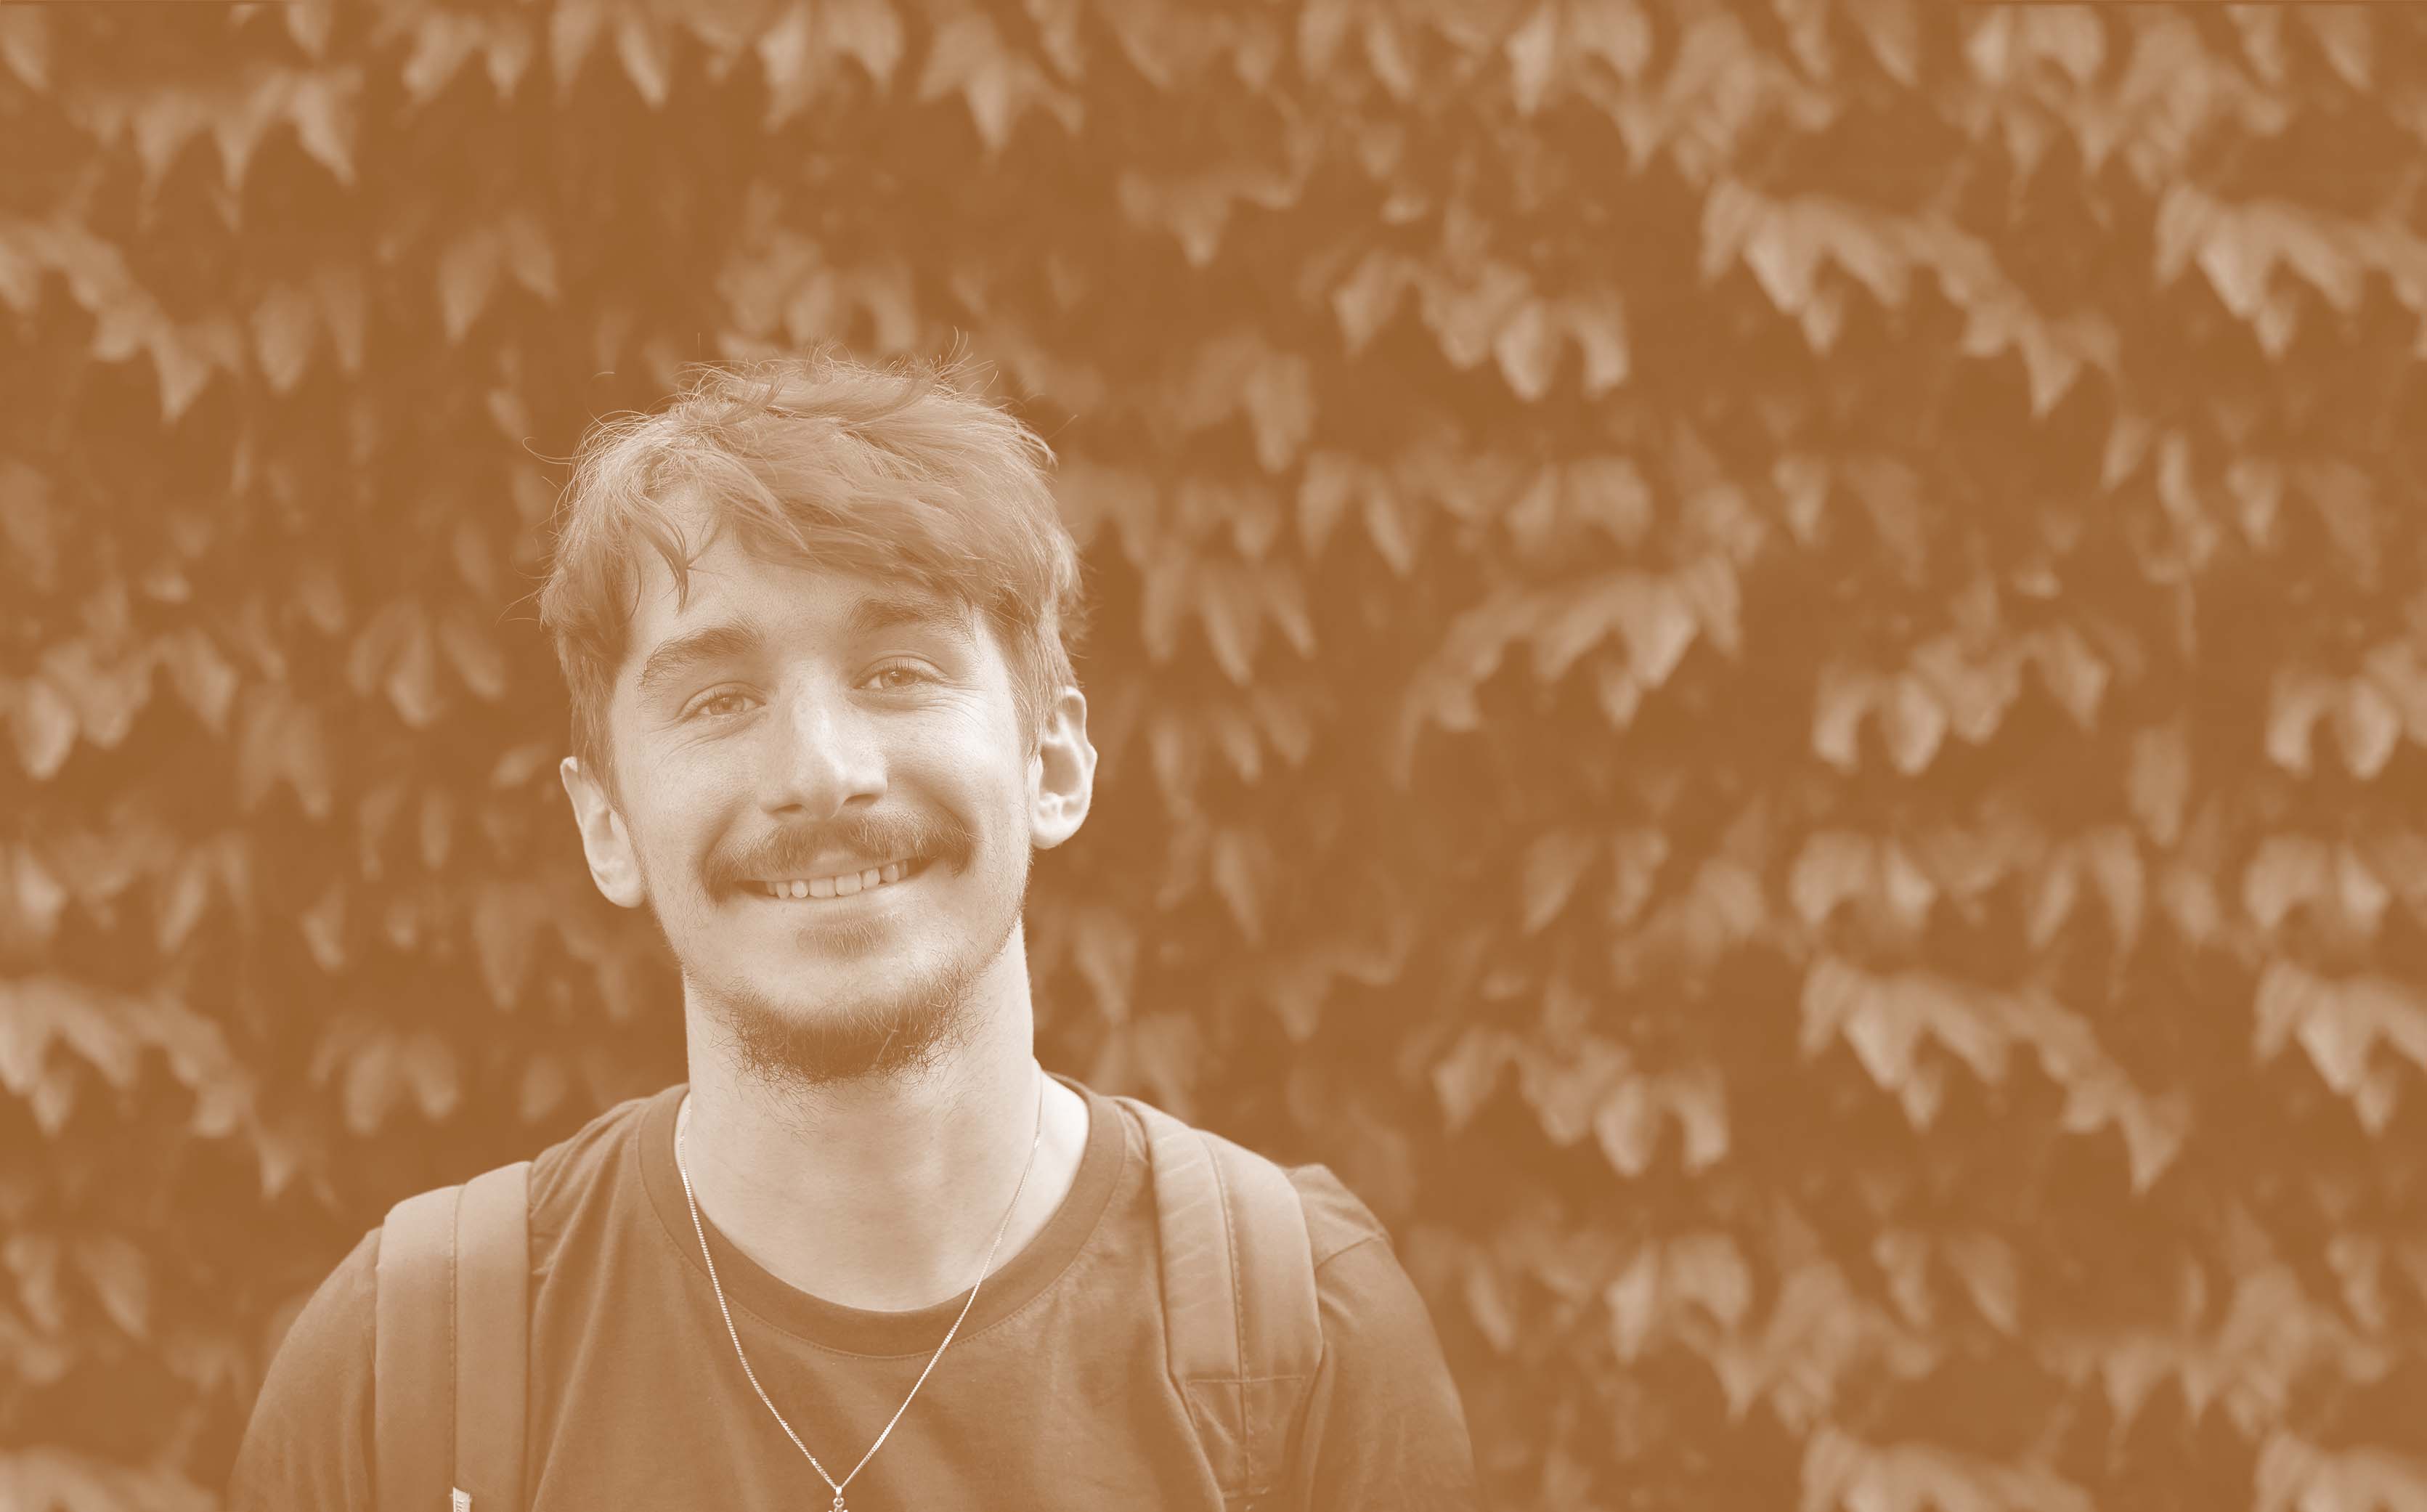 An orange-tinted picture of me smiling against a backdrop of leaves